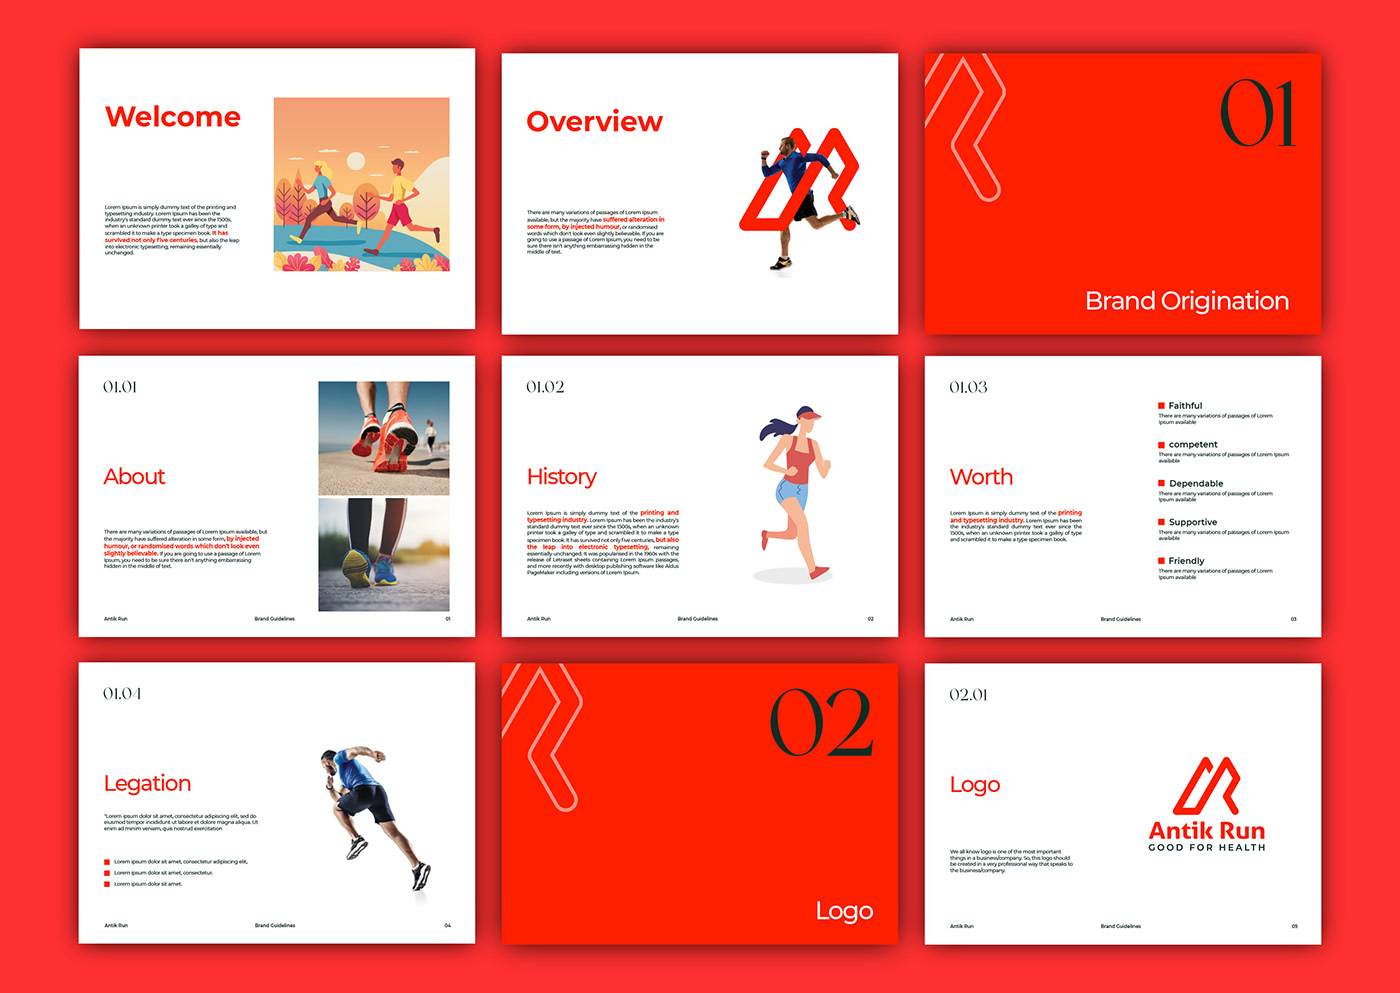 Brand guidelines, brand style guide